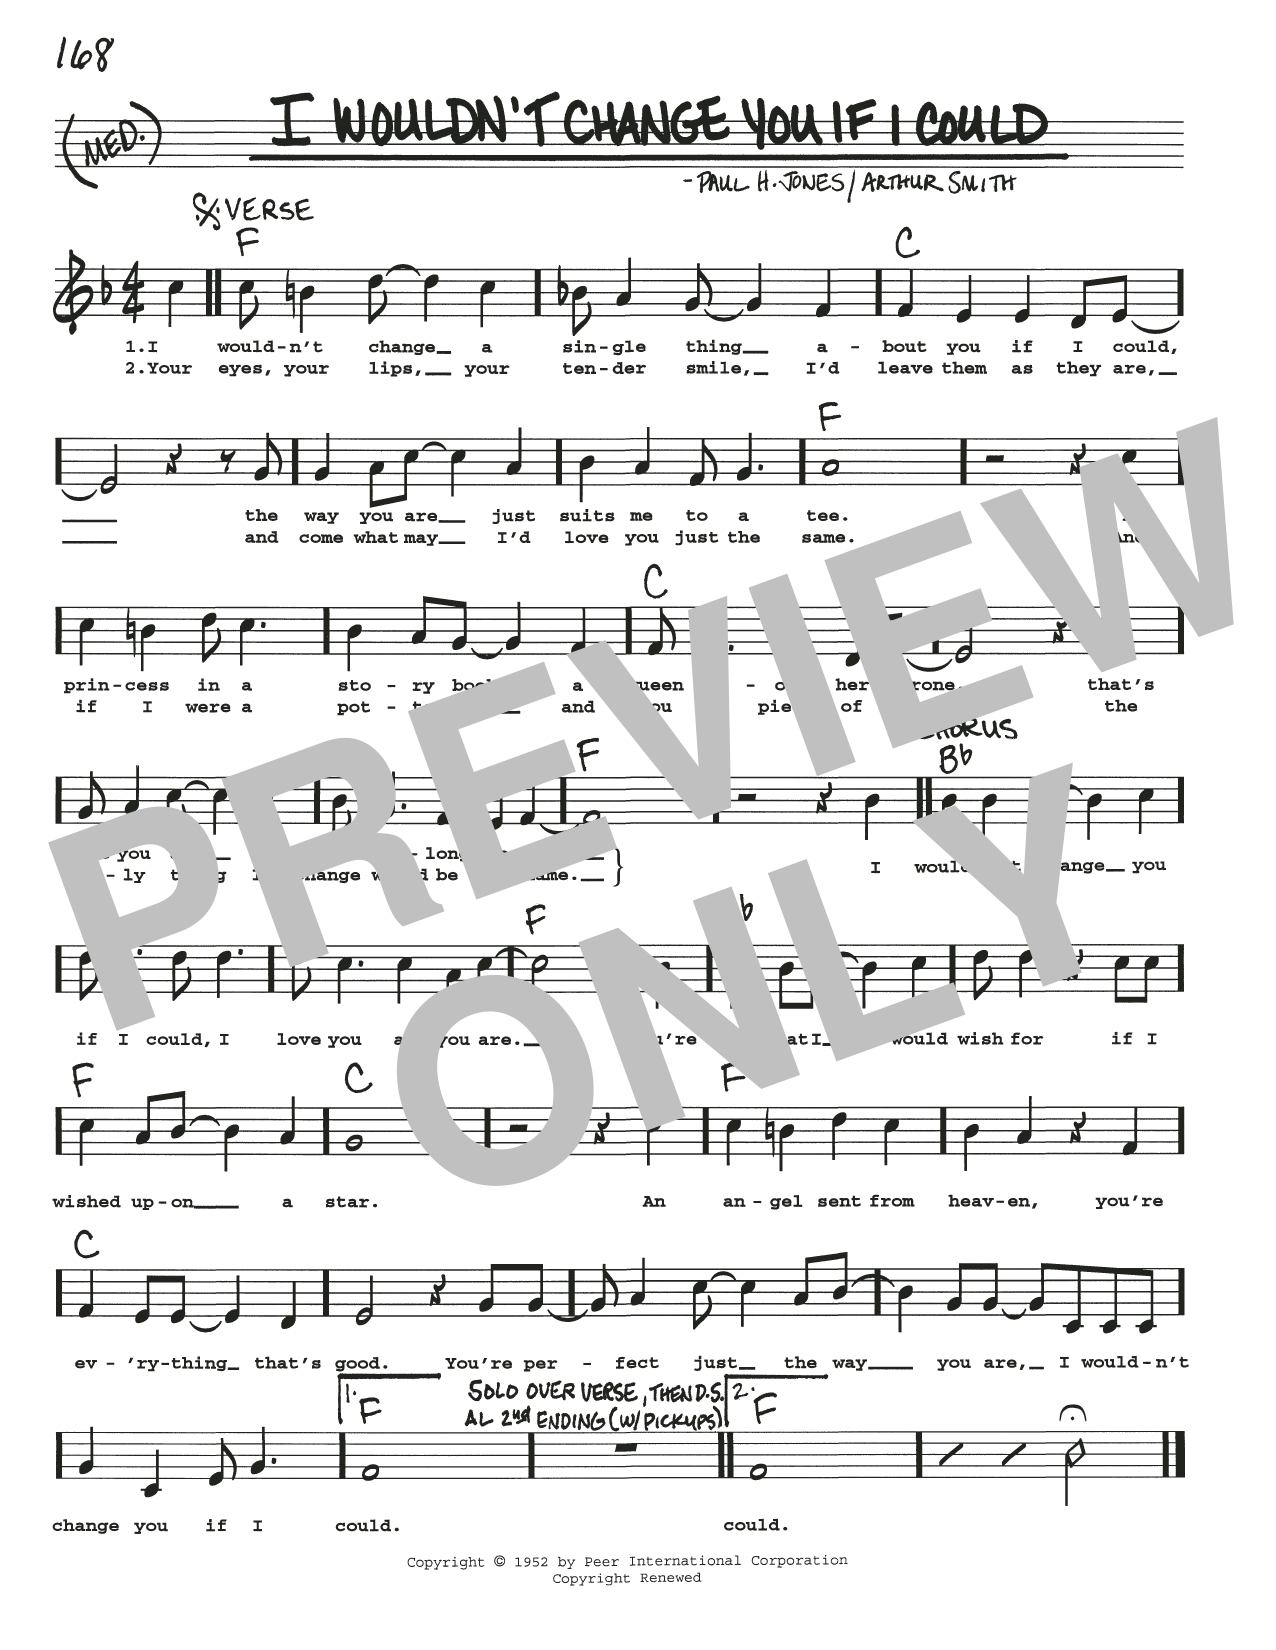 Download Ricky Skaggs I Wouldn't Change You If I Could Sheet Music